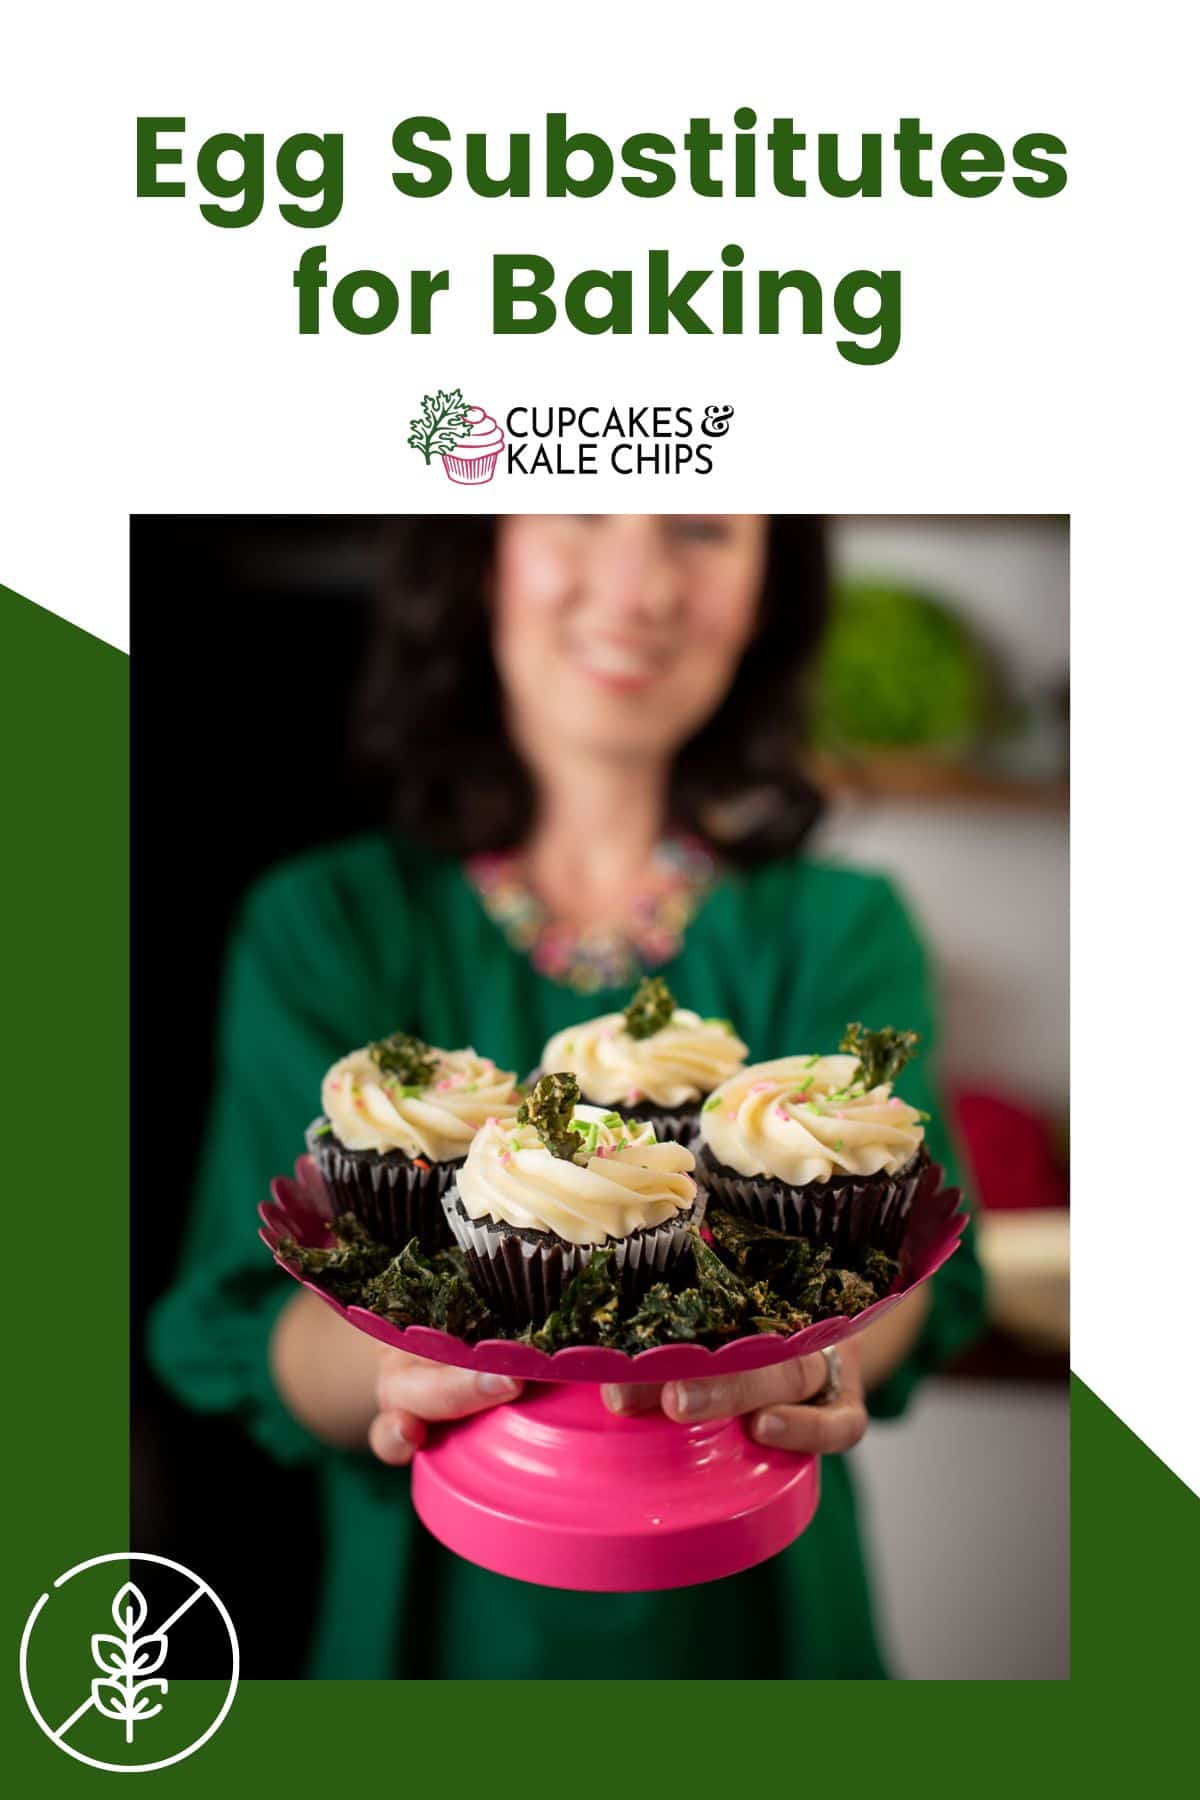 A pink cake stand with four cupcakes on it being held by a woman who is out of focus in the background overlayed on a green and white background with text that says "Egg Substitutes for Baking".